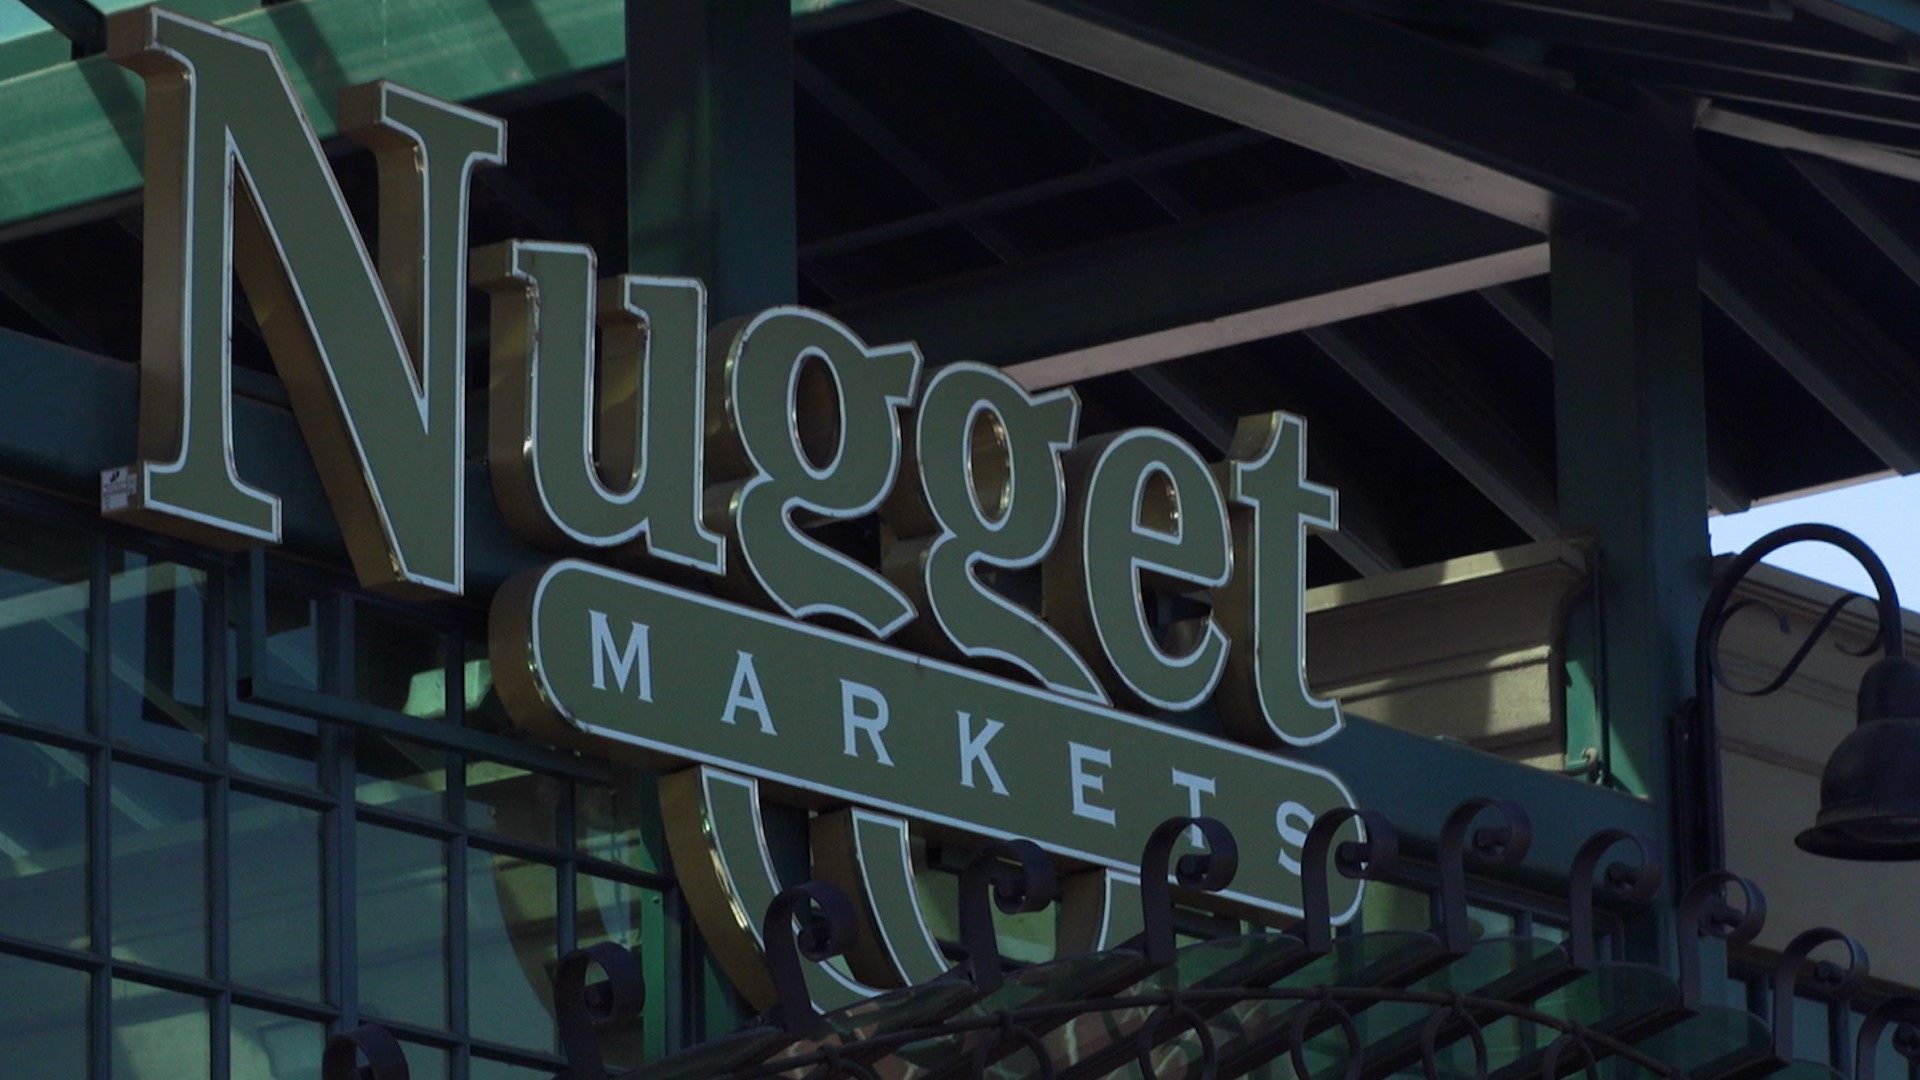 Nugget Markets earned their number 24 spot on Fortune Magazine's “100 Best Companies to Work For” 2021 list. They also happen to be hiring.